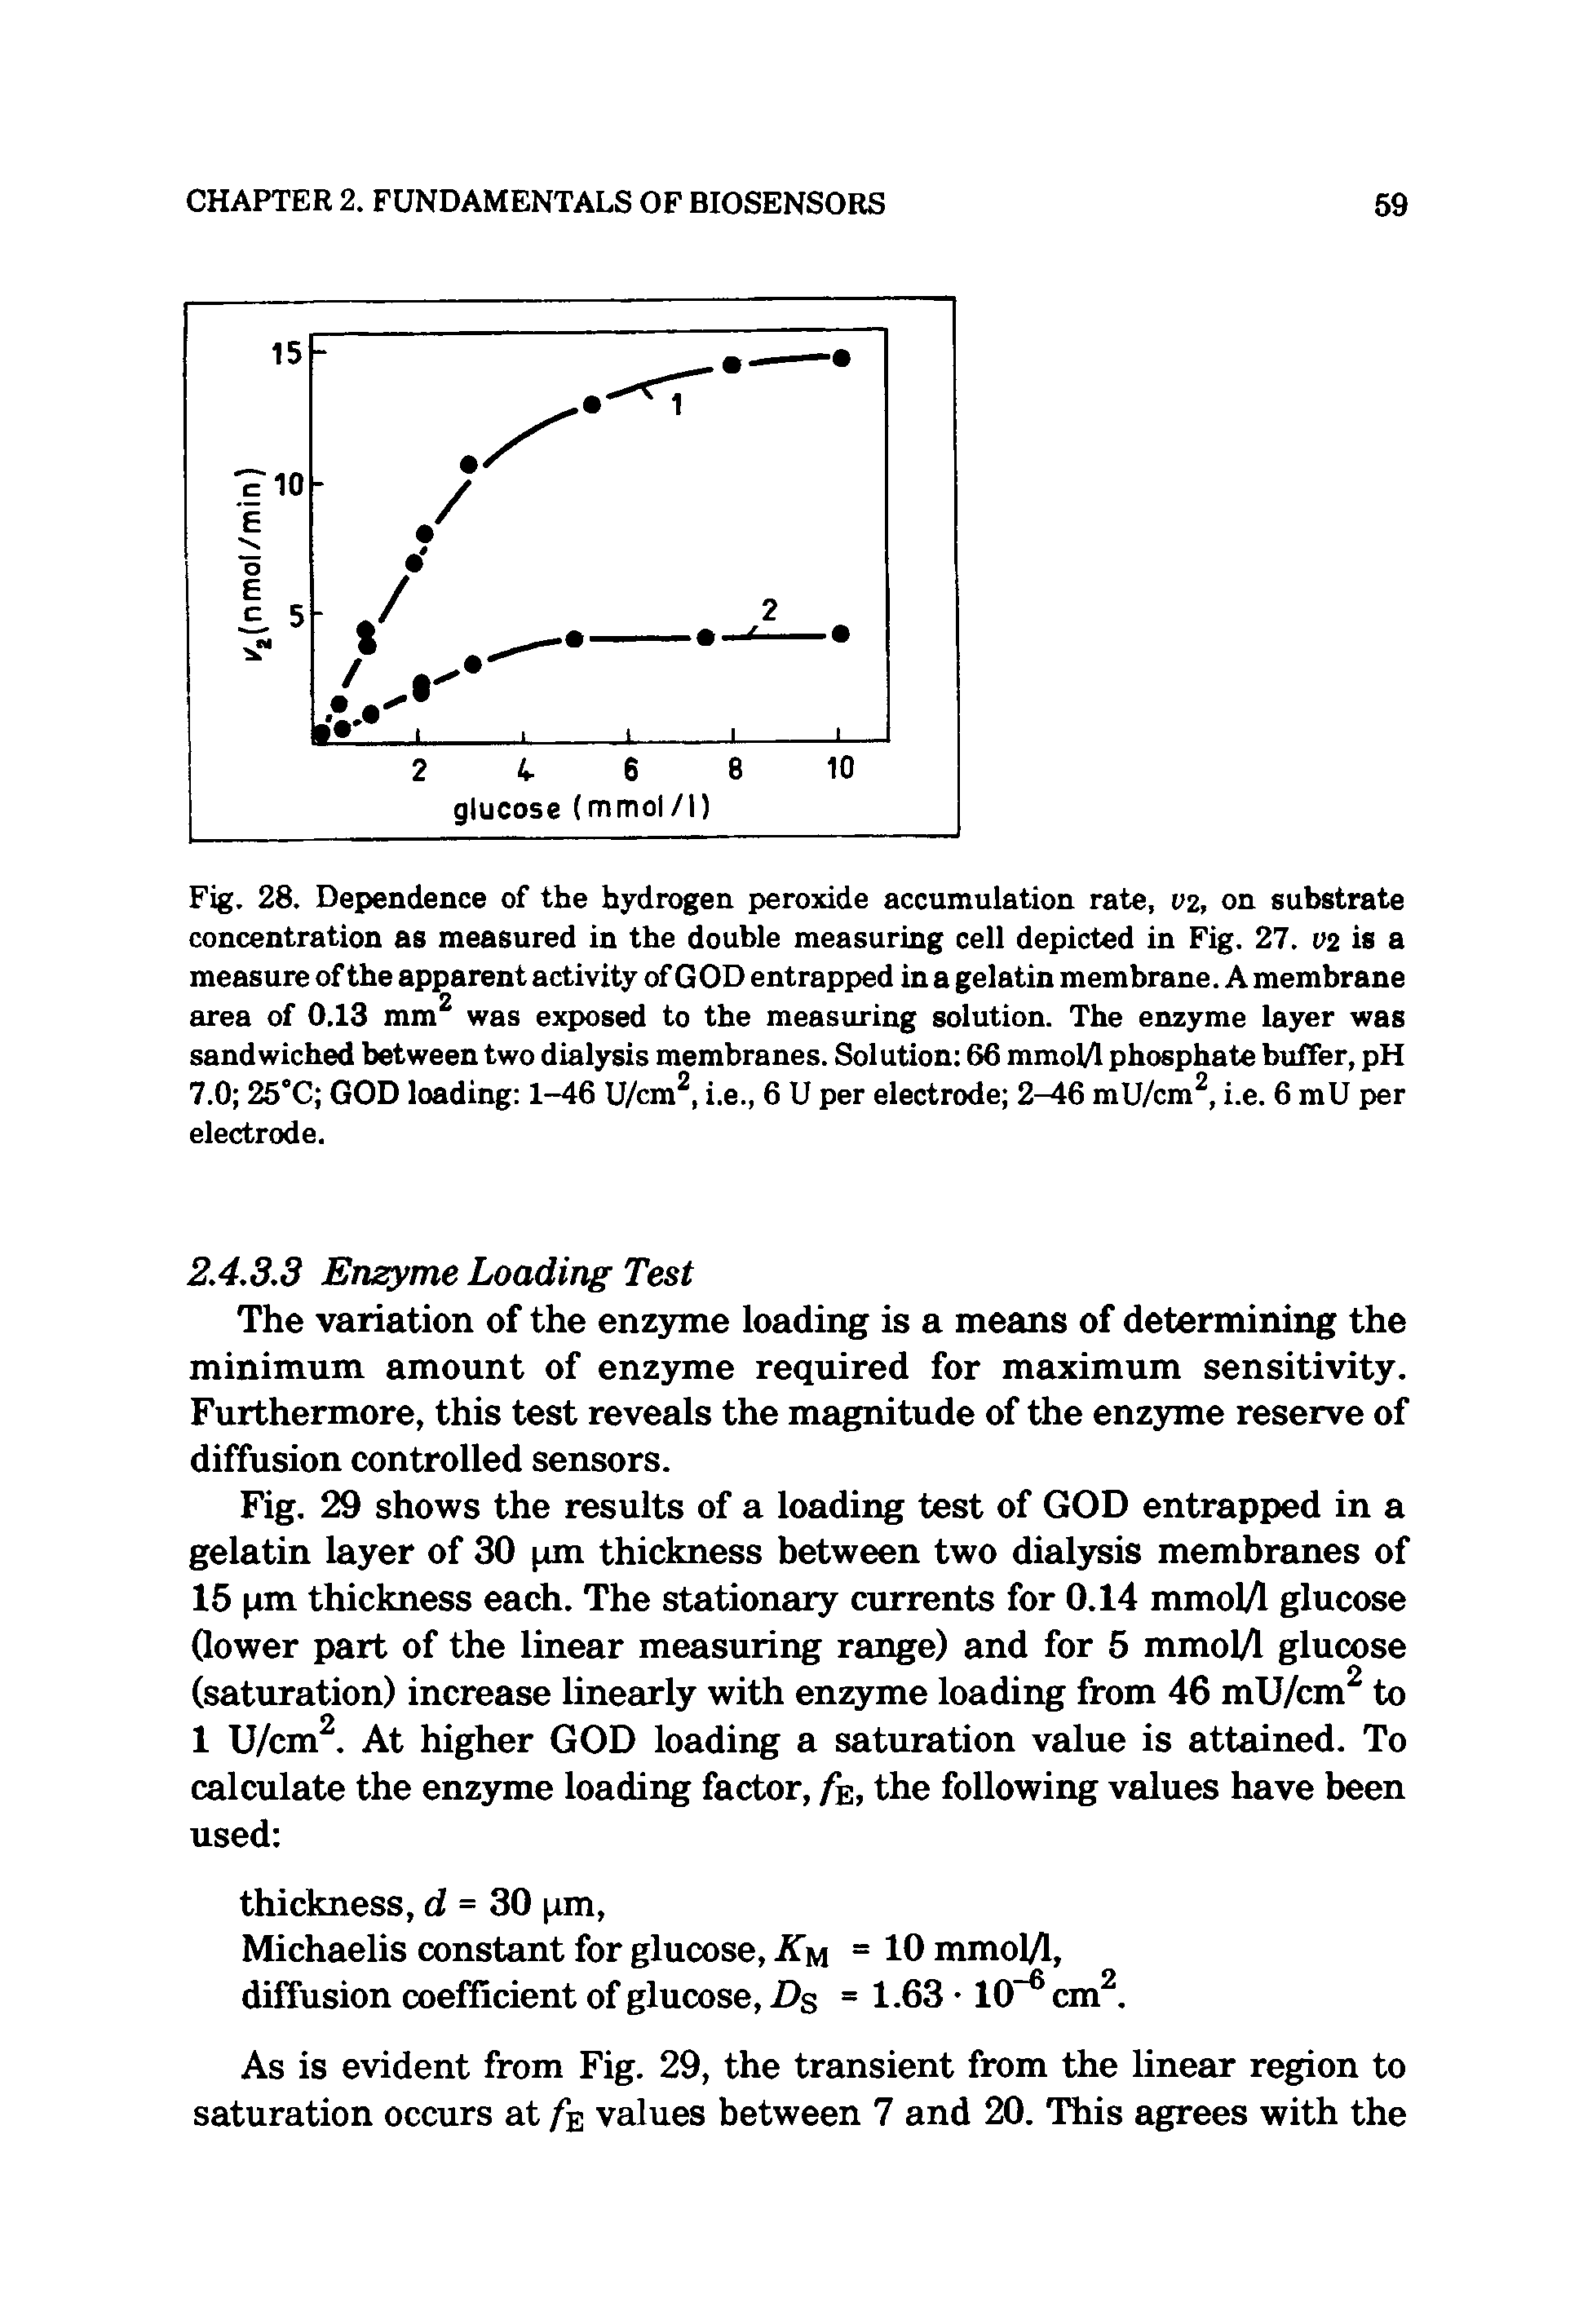 Fig. 28. Dependence of the hydrogen peroxide accumulation rate, i>2, on substrate concentration as measured in the double measuring cell depicted in Fig. 27. V2 is a measure of the apparent activity of G OD entrapped in a gelatin membrane. A membrane area of 0.13 mm2 was exposed to the measuring solution. The enzyme layer was sandwiched between two dialysis membranes. Solution 66 mmol/1 phosphate buffer, pH 7.0 25°C GOD loading 1-46 U/cm2, i.e., 6 U per electrode 2-46 mU/cm2, i.e. 6 mU per electrode.